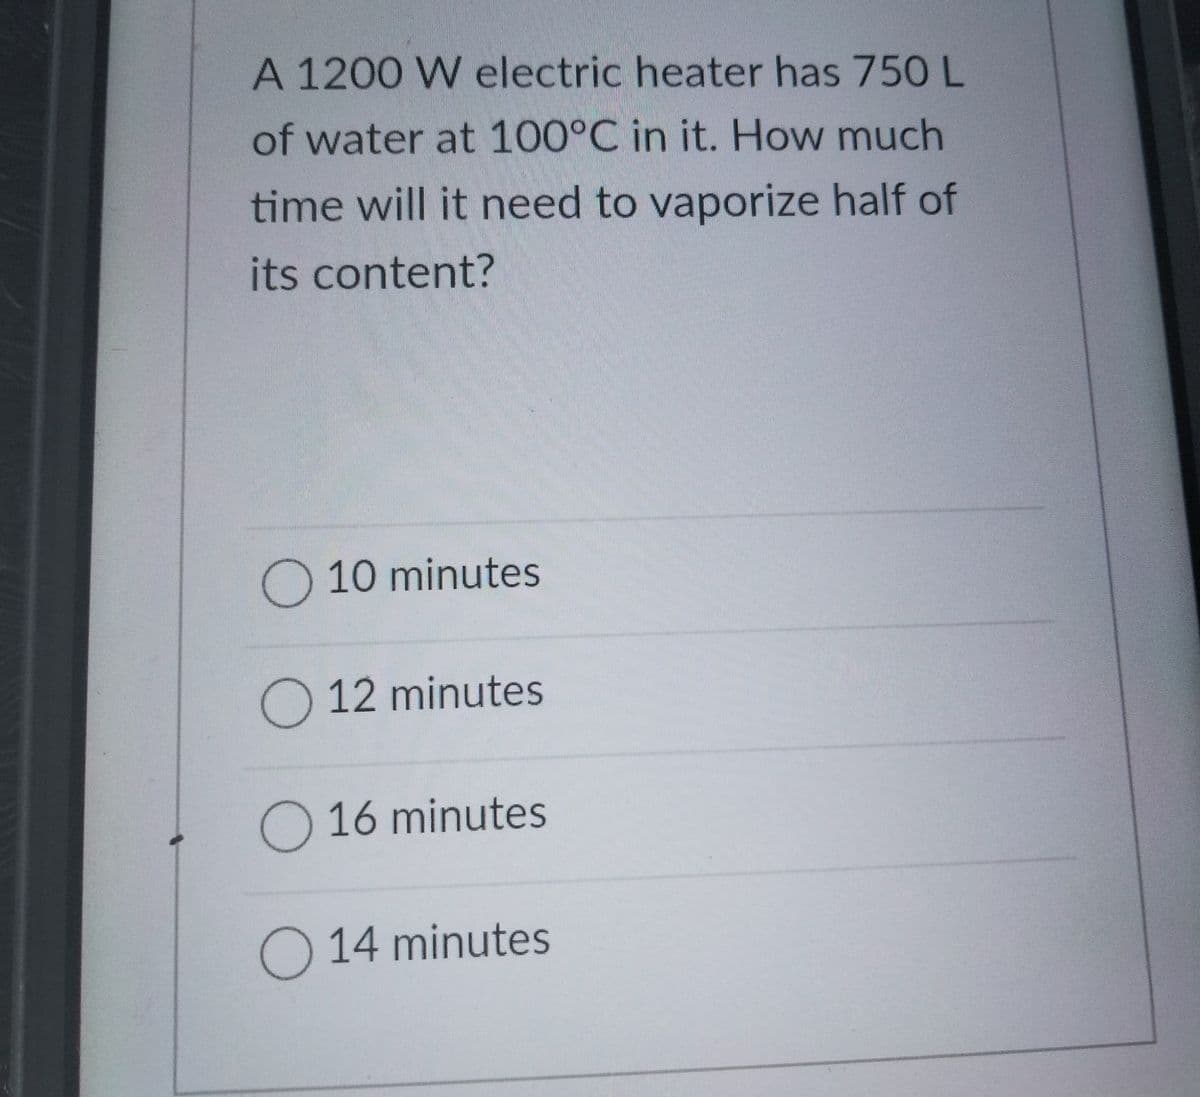 A 1200 W electric heater has 750 L
of water at 100°C in it. How much
time will it need to vaporize half of
its content?
O 10 minutes
O 12 minutes
O 16 minutes
O 14 minutes
